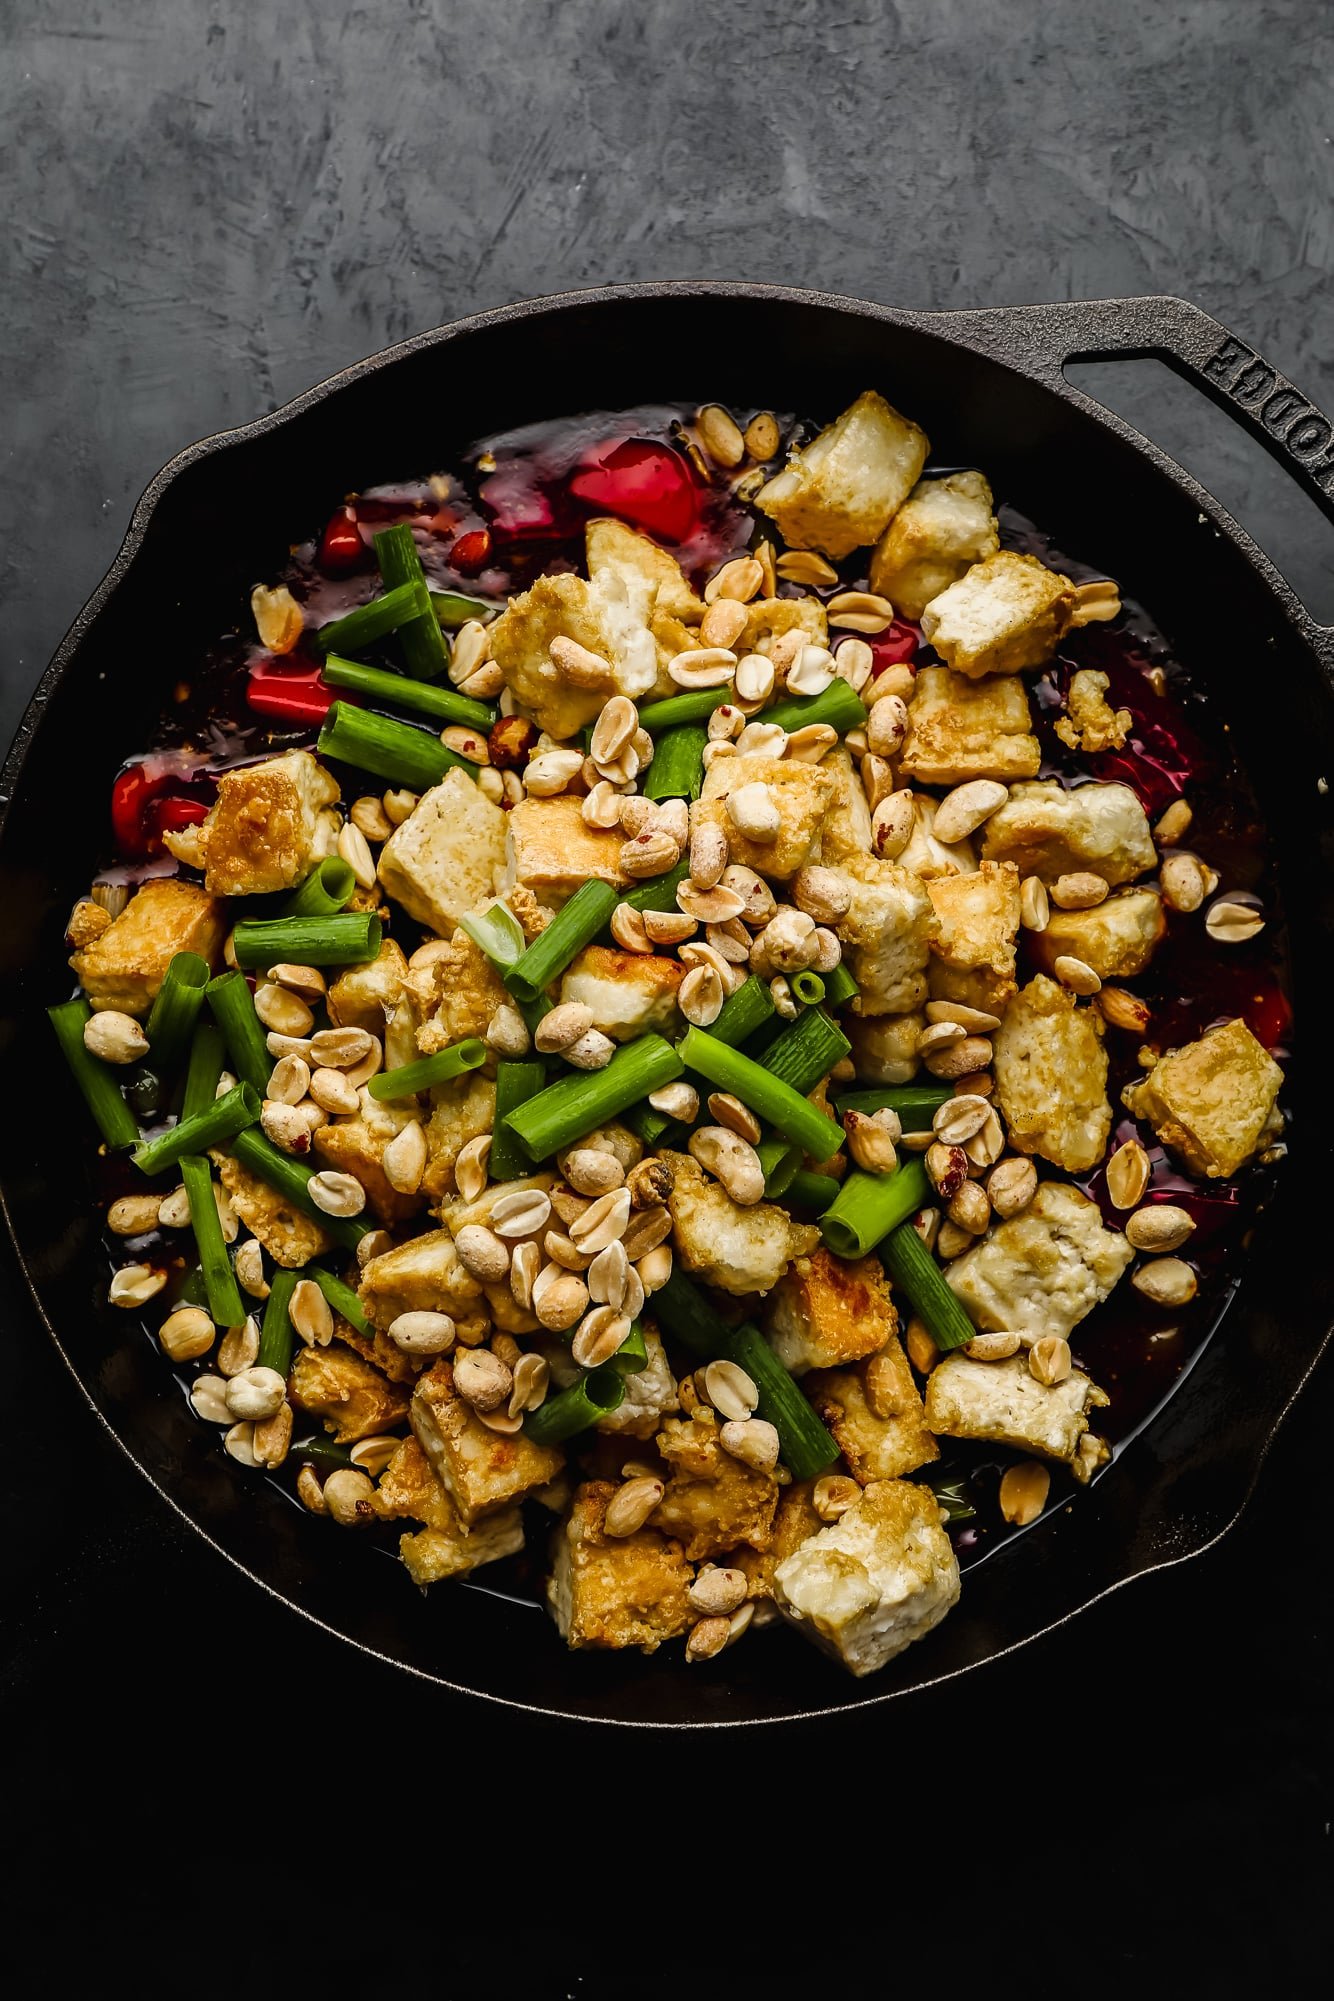 fried tofu pieces, peanuts, and green onions on top of stir fried vegetables in a black cast iron skillet.